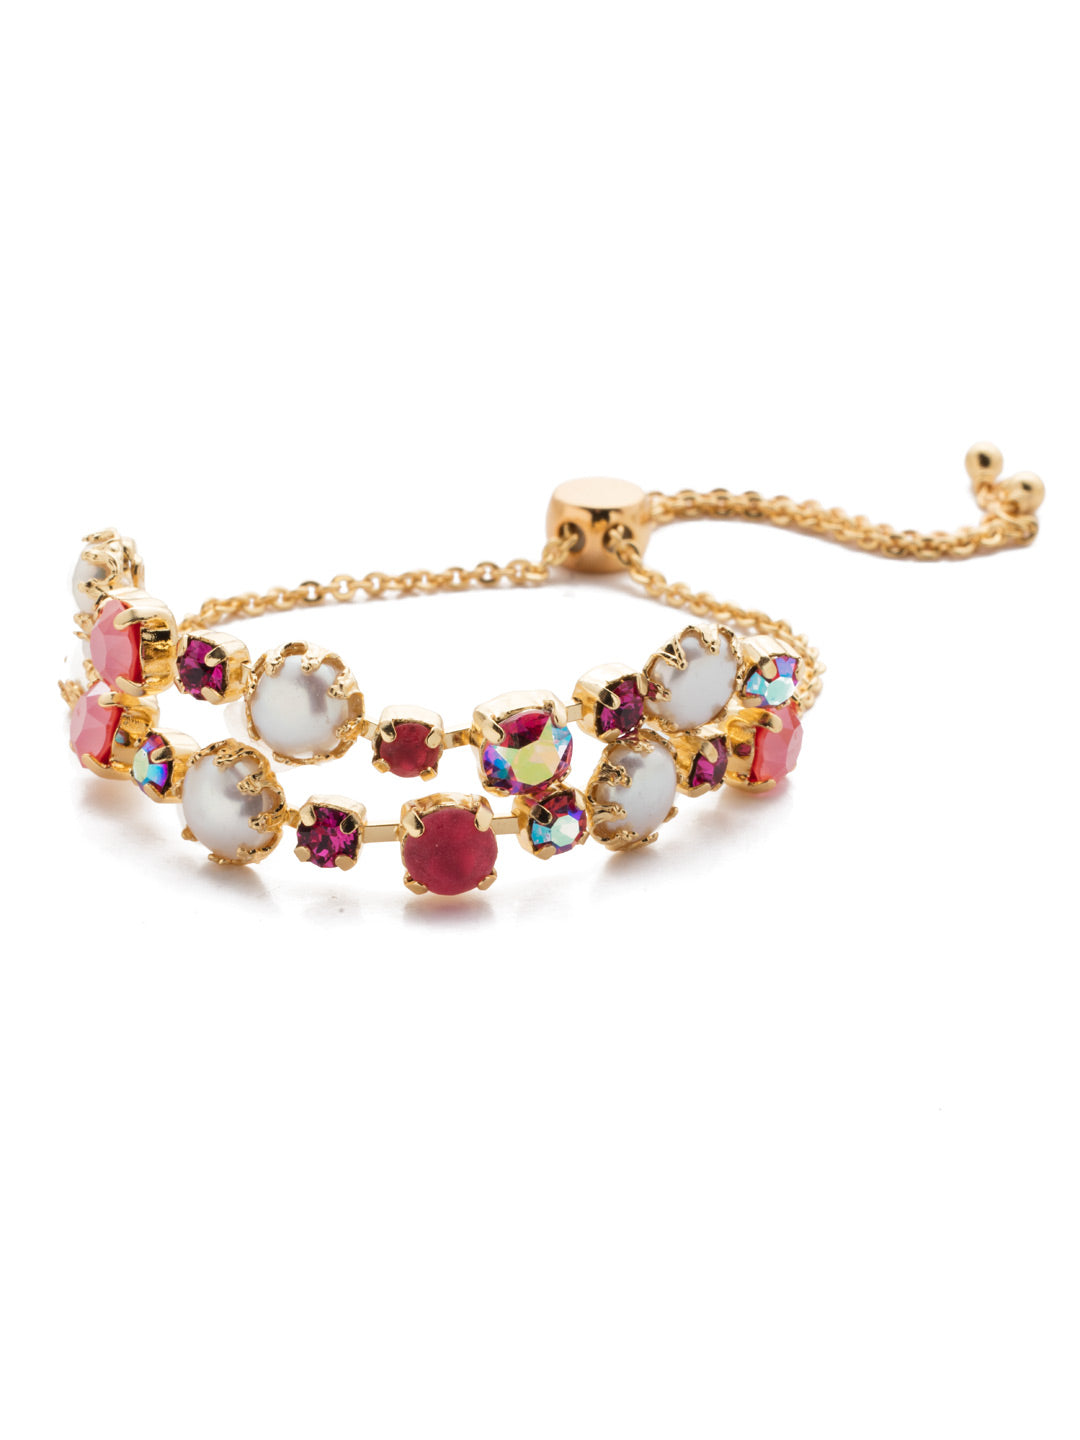 Arbor Slider Bracelet - BES120BGBGA - The Arbor Slider Bracelet is boldly stylish with two stacked layers of assorted crystals and freshwater pearls. From Sorrelli's Begonia collection in our Bright Gold-tone finish.